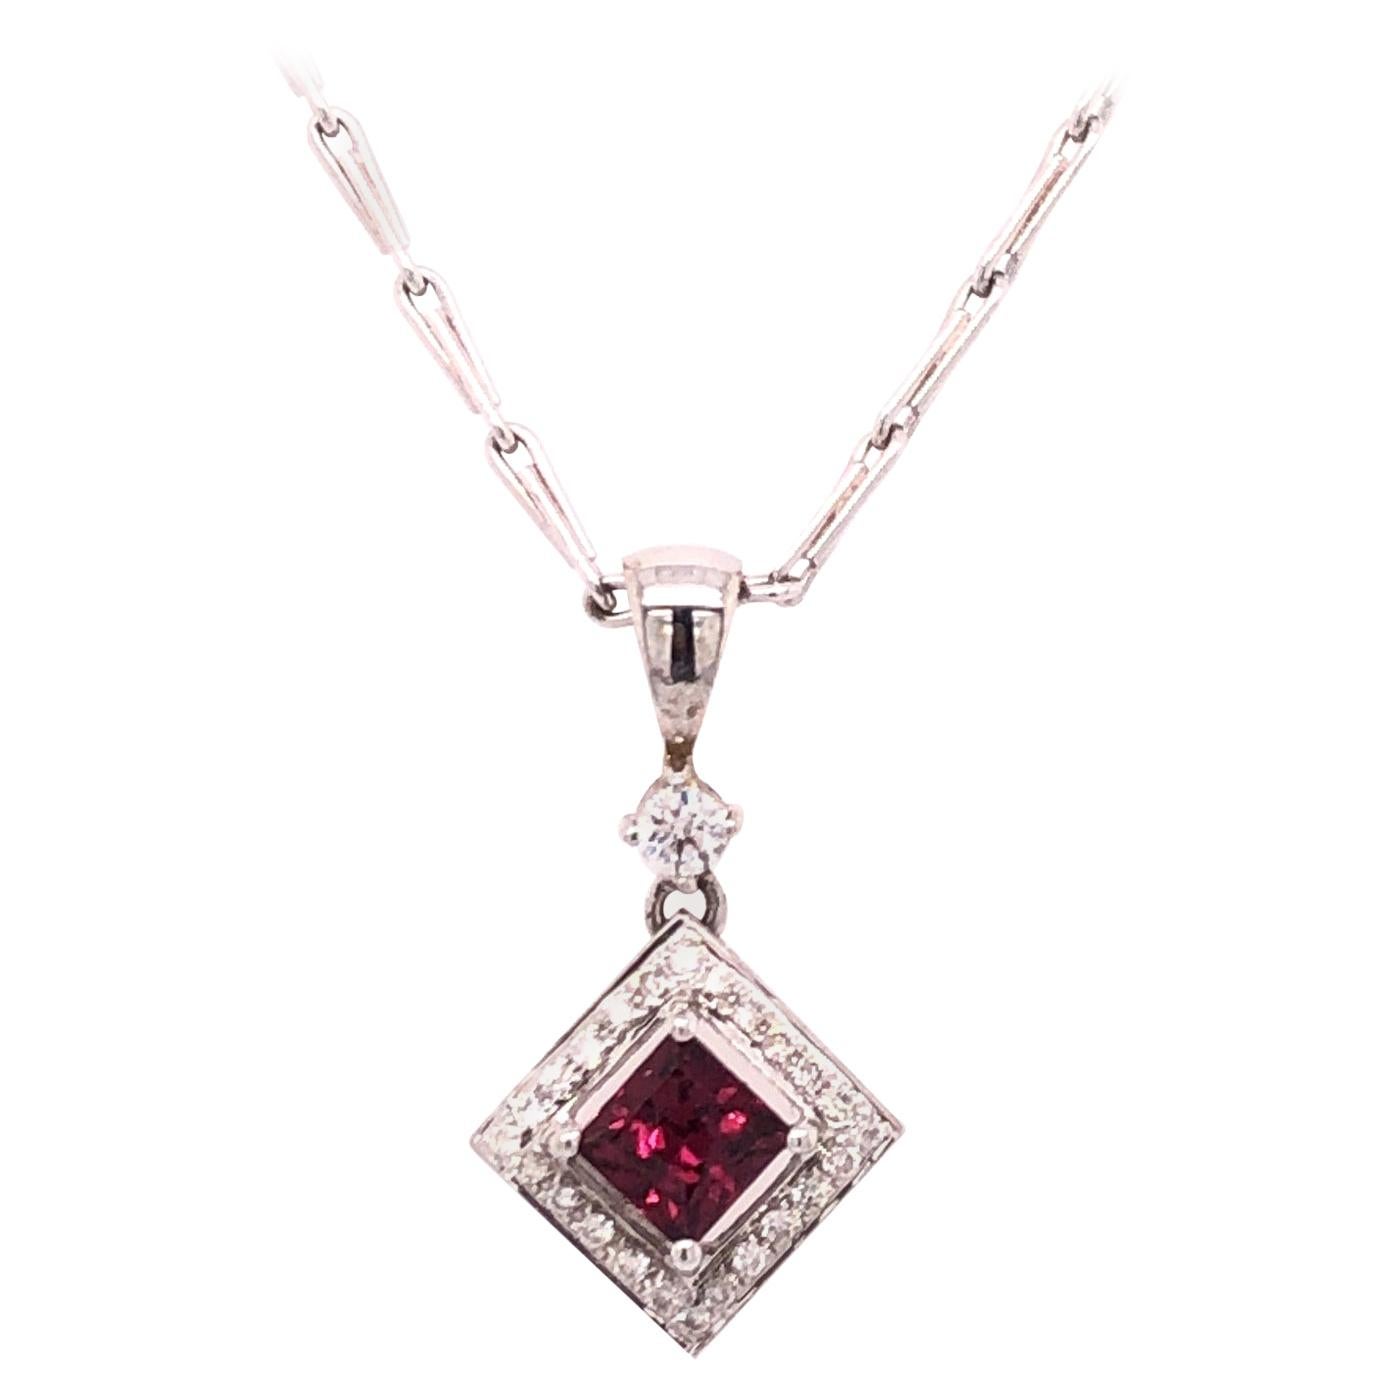 Princess Cut Pink Sapphire, Diamond, and White Gold Necklace